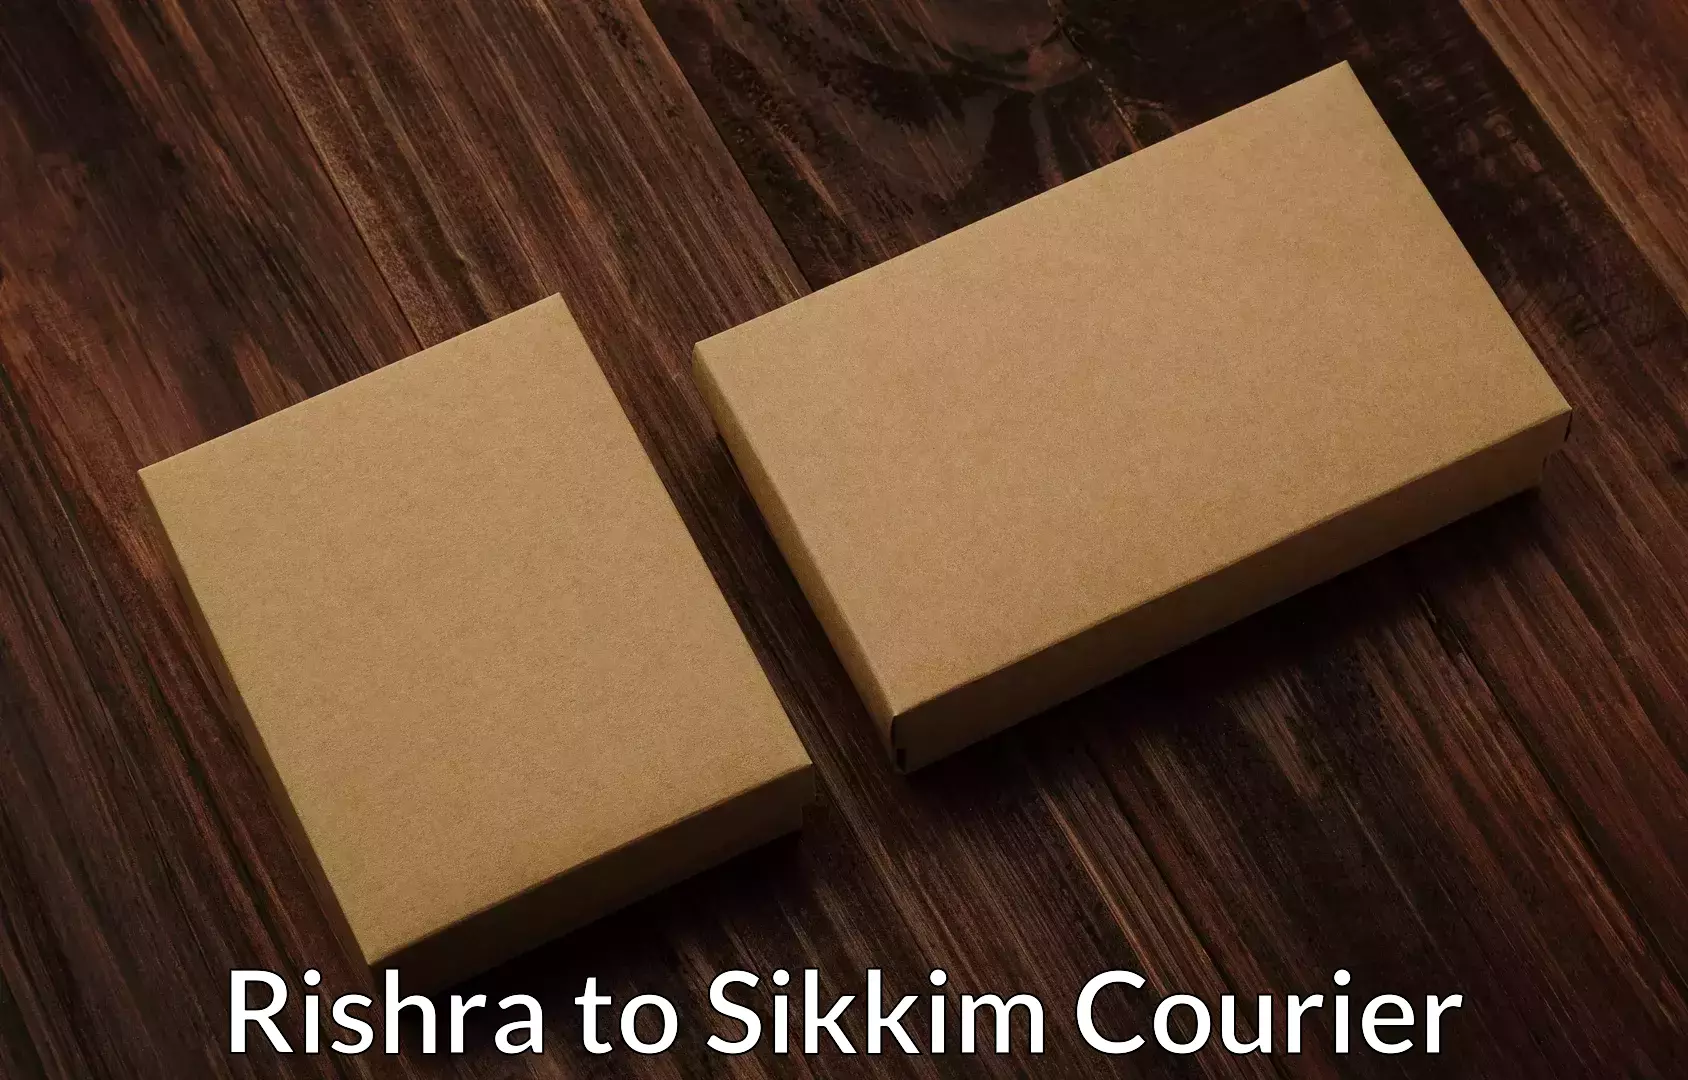 Budget-friendly movers Rishra to Sikkim